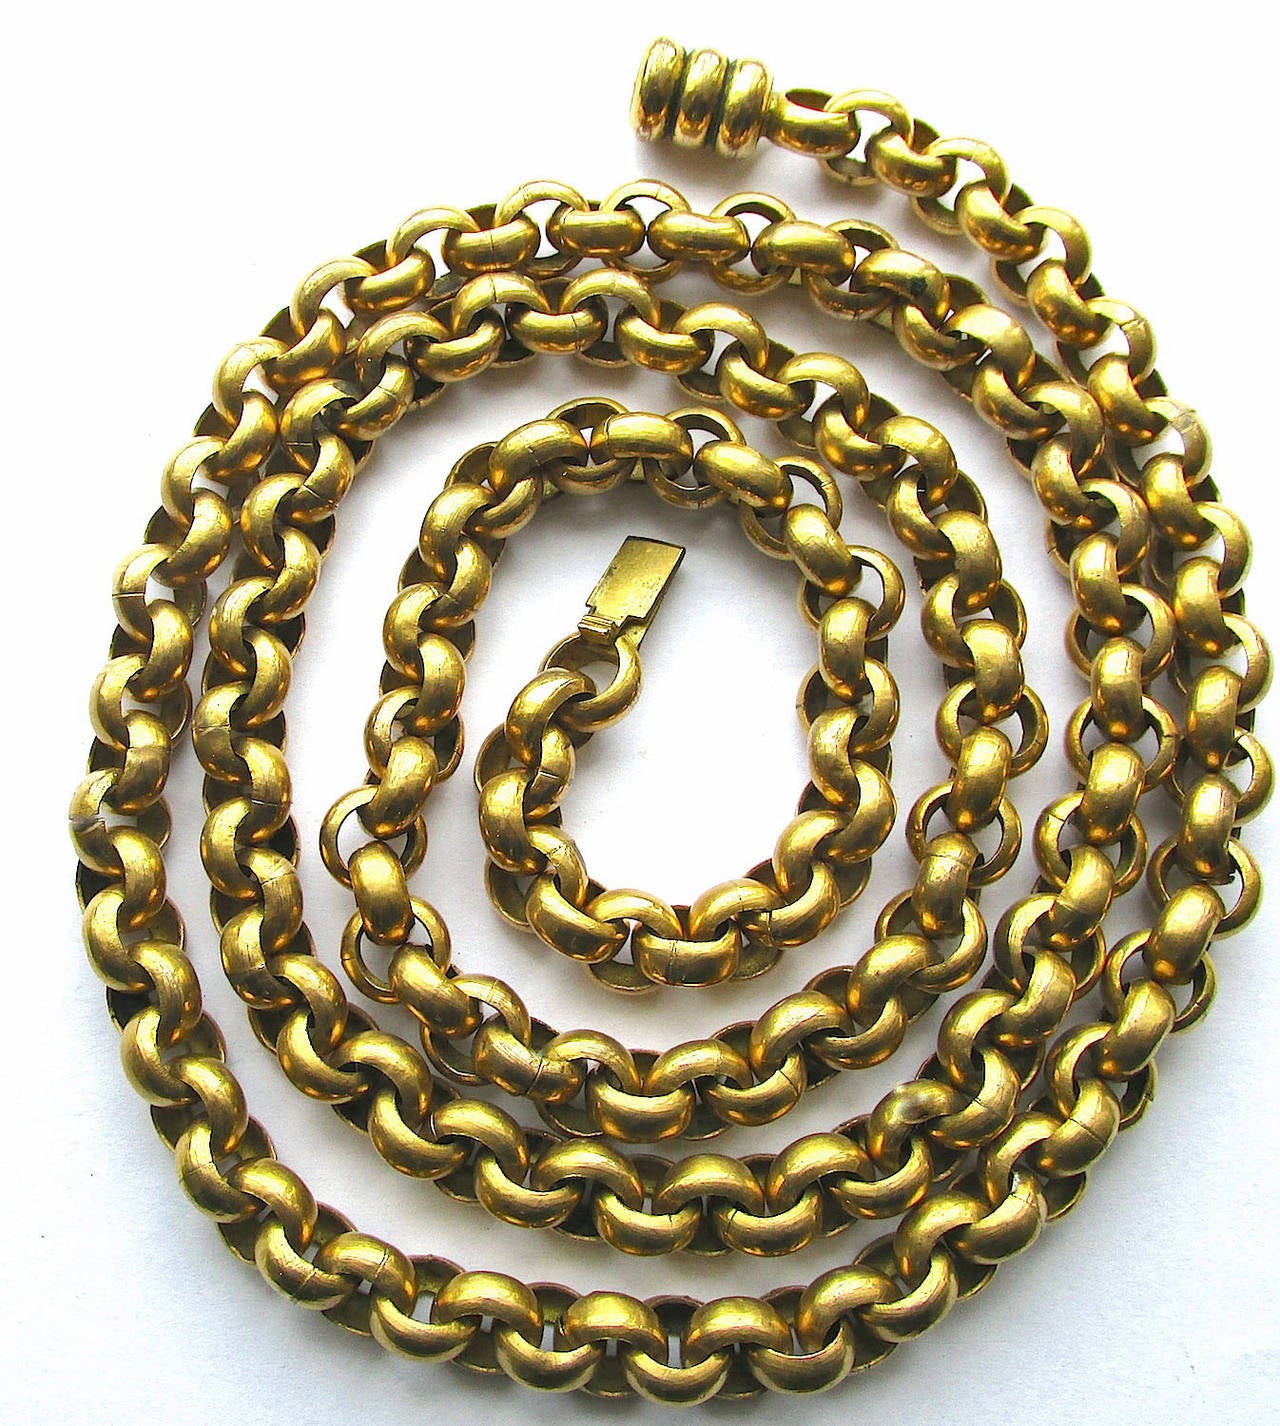 Bold Georgian pinchbeck long chain with a barrel clasp was used in its day to hold ones muff. Today one wears it for glamor. It can be triple looped to wear high or doubled to wear long. It is versatile for day or evening wear. Pinchbeck is an alloy